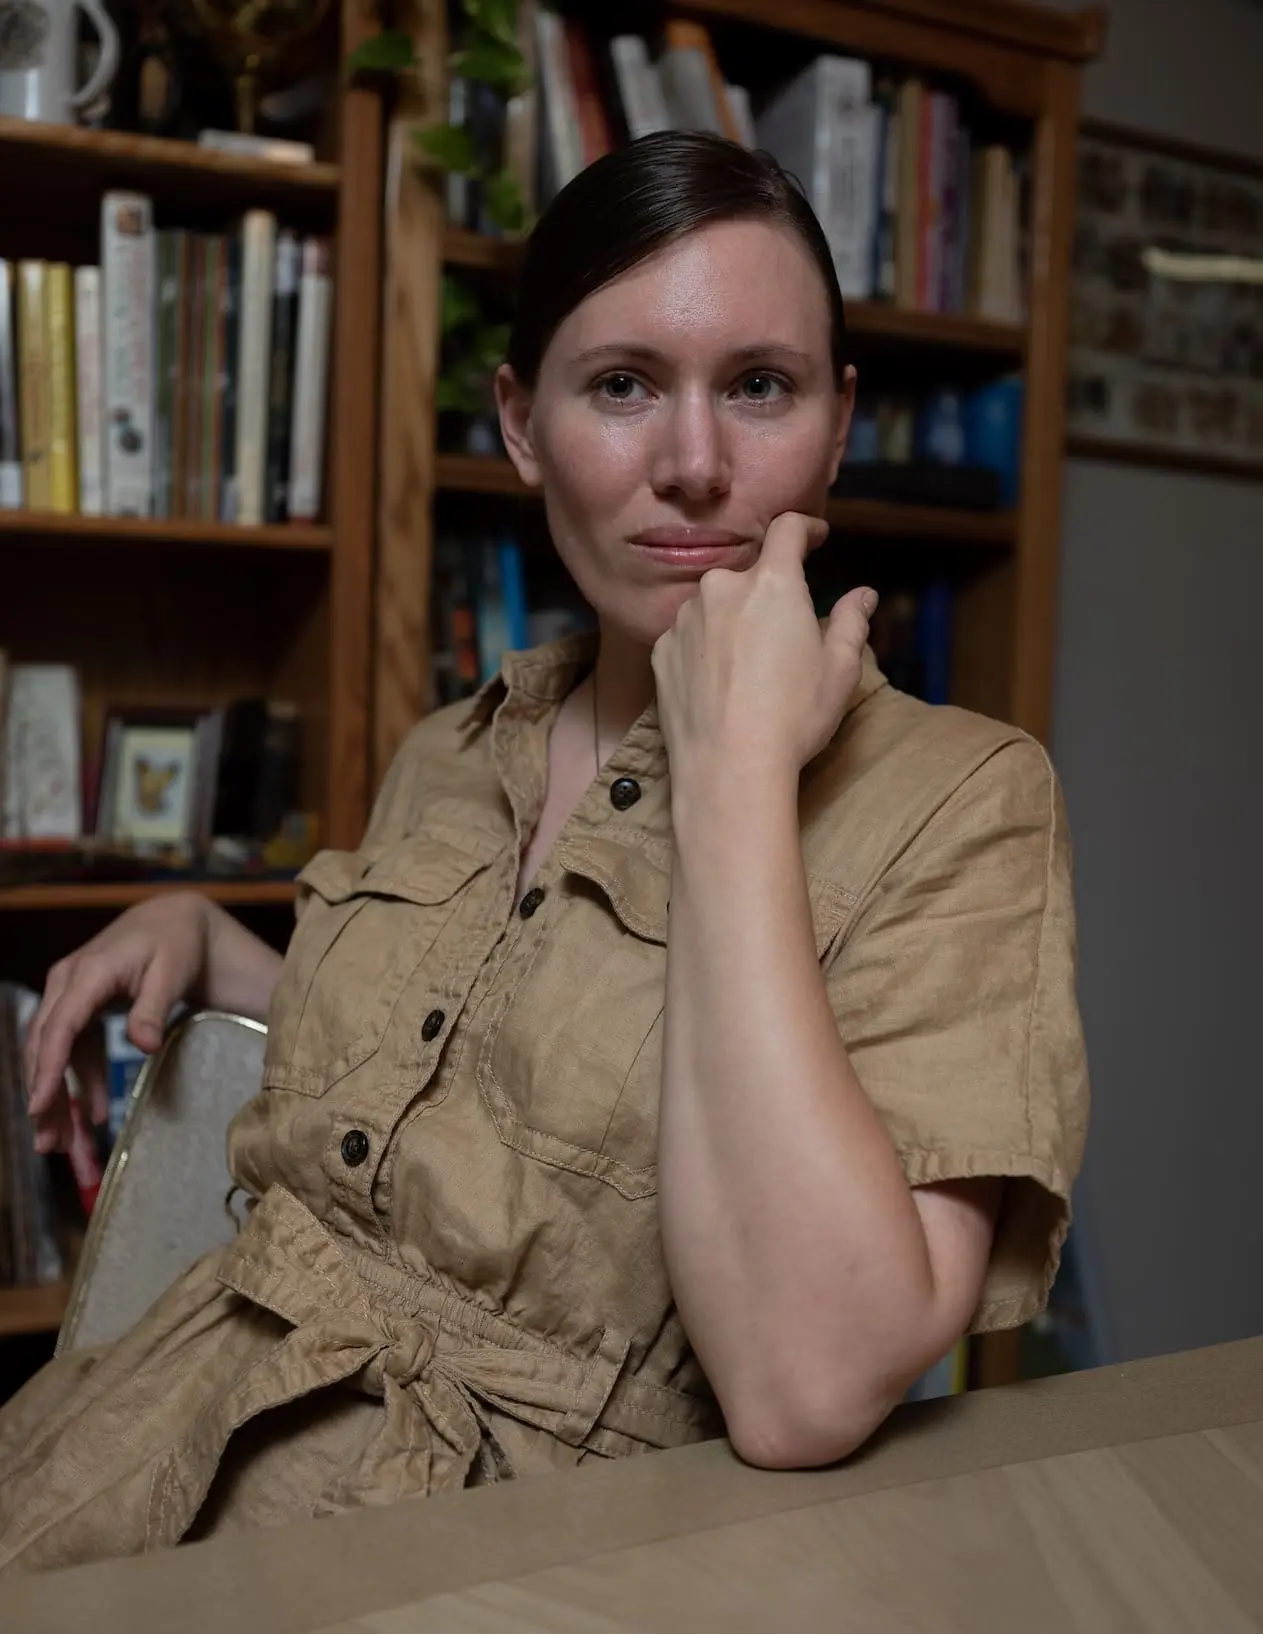 A woman sits in front of a bookshelf with her hand holding up her chin.